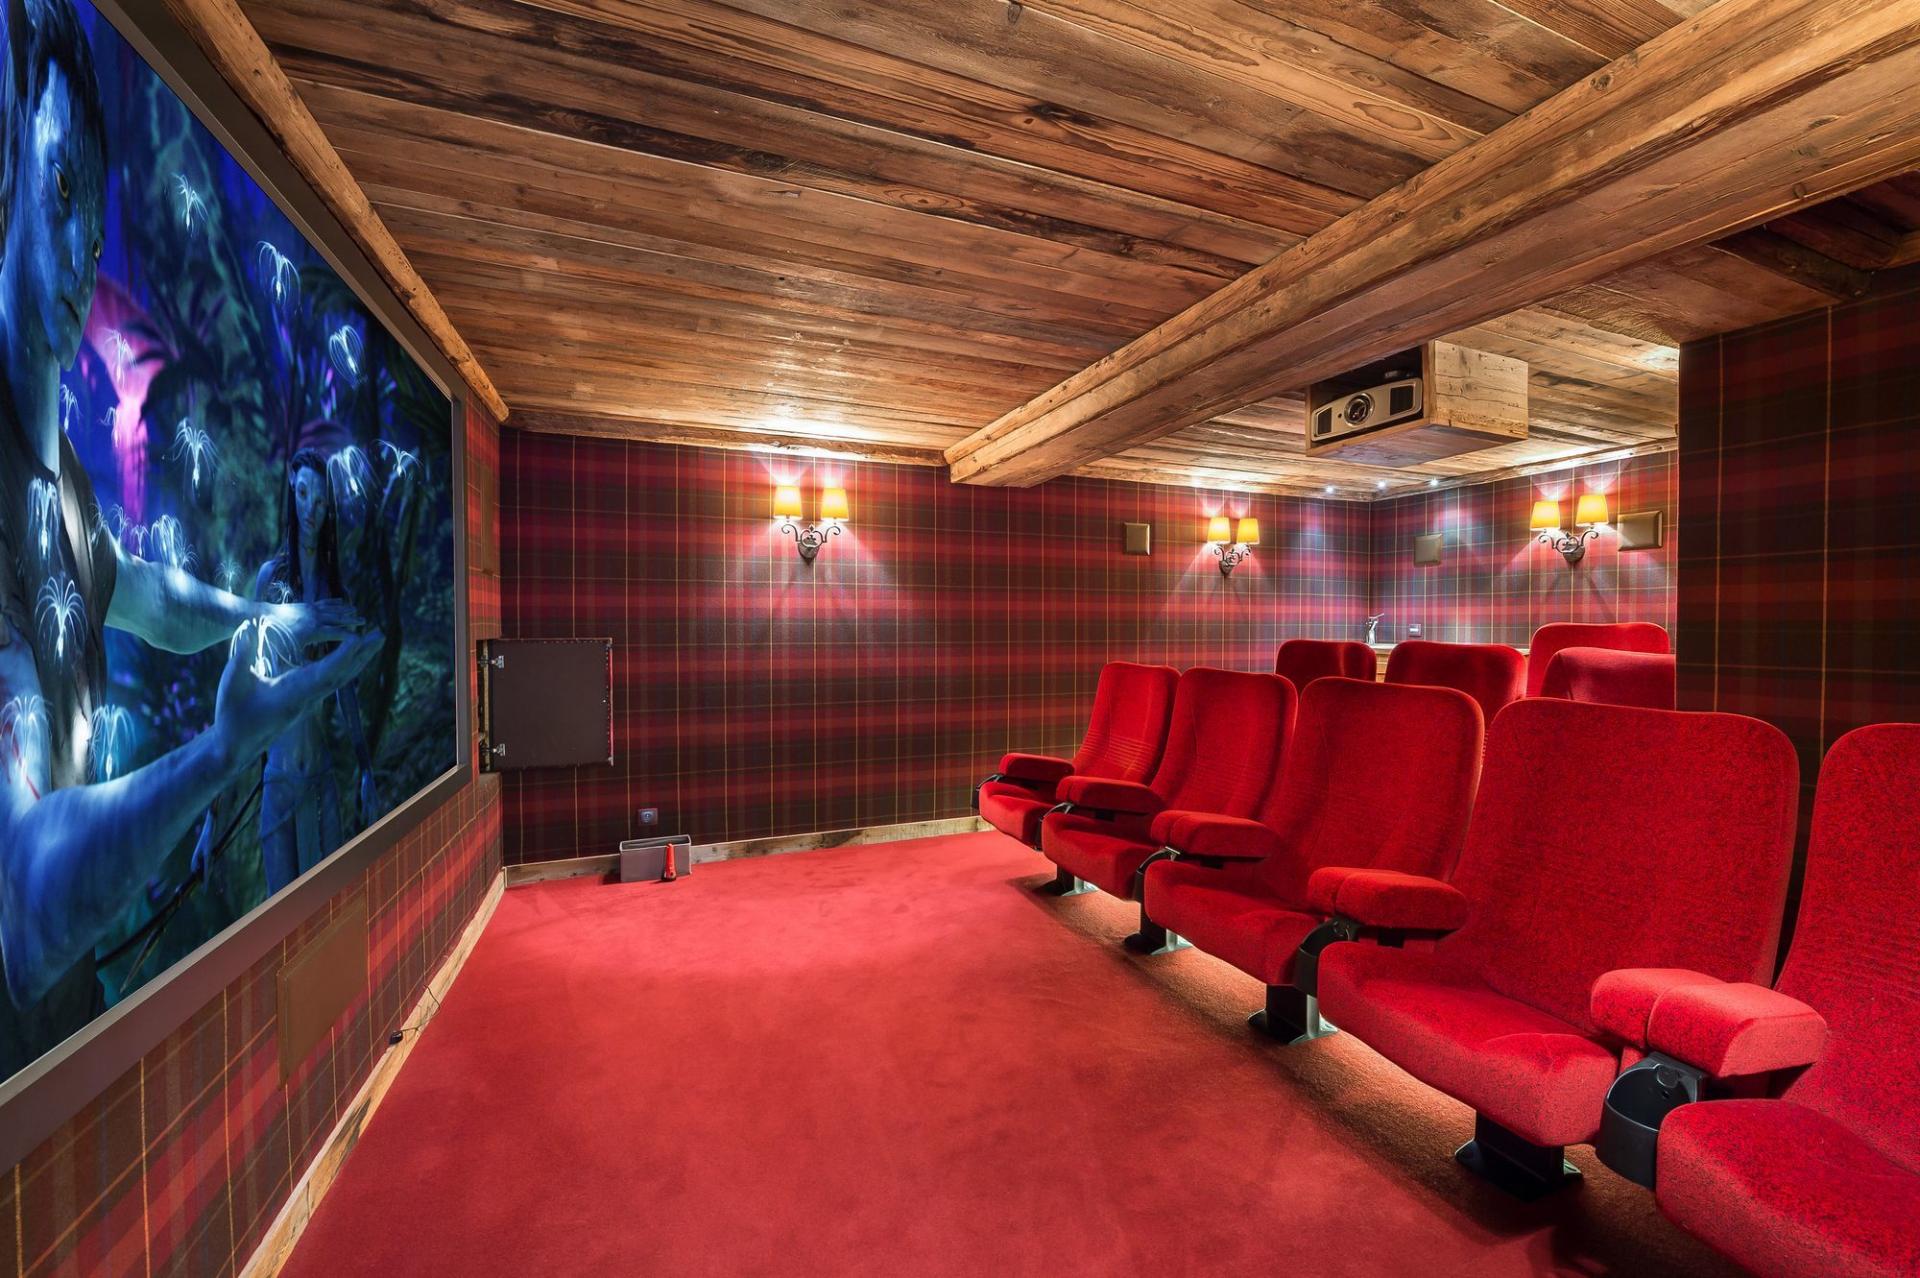 CHALET BELLECOTE AND ITS HOME CINEMA